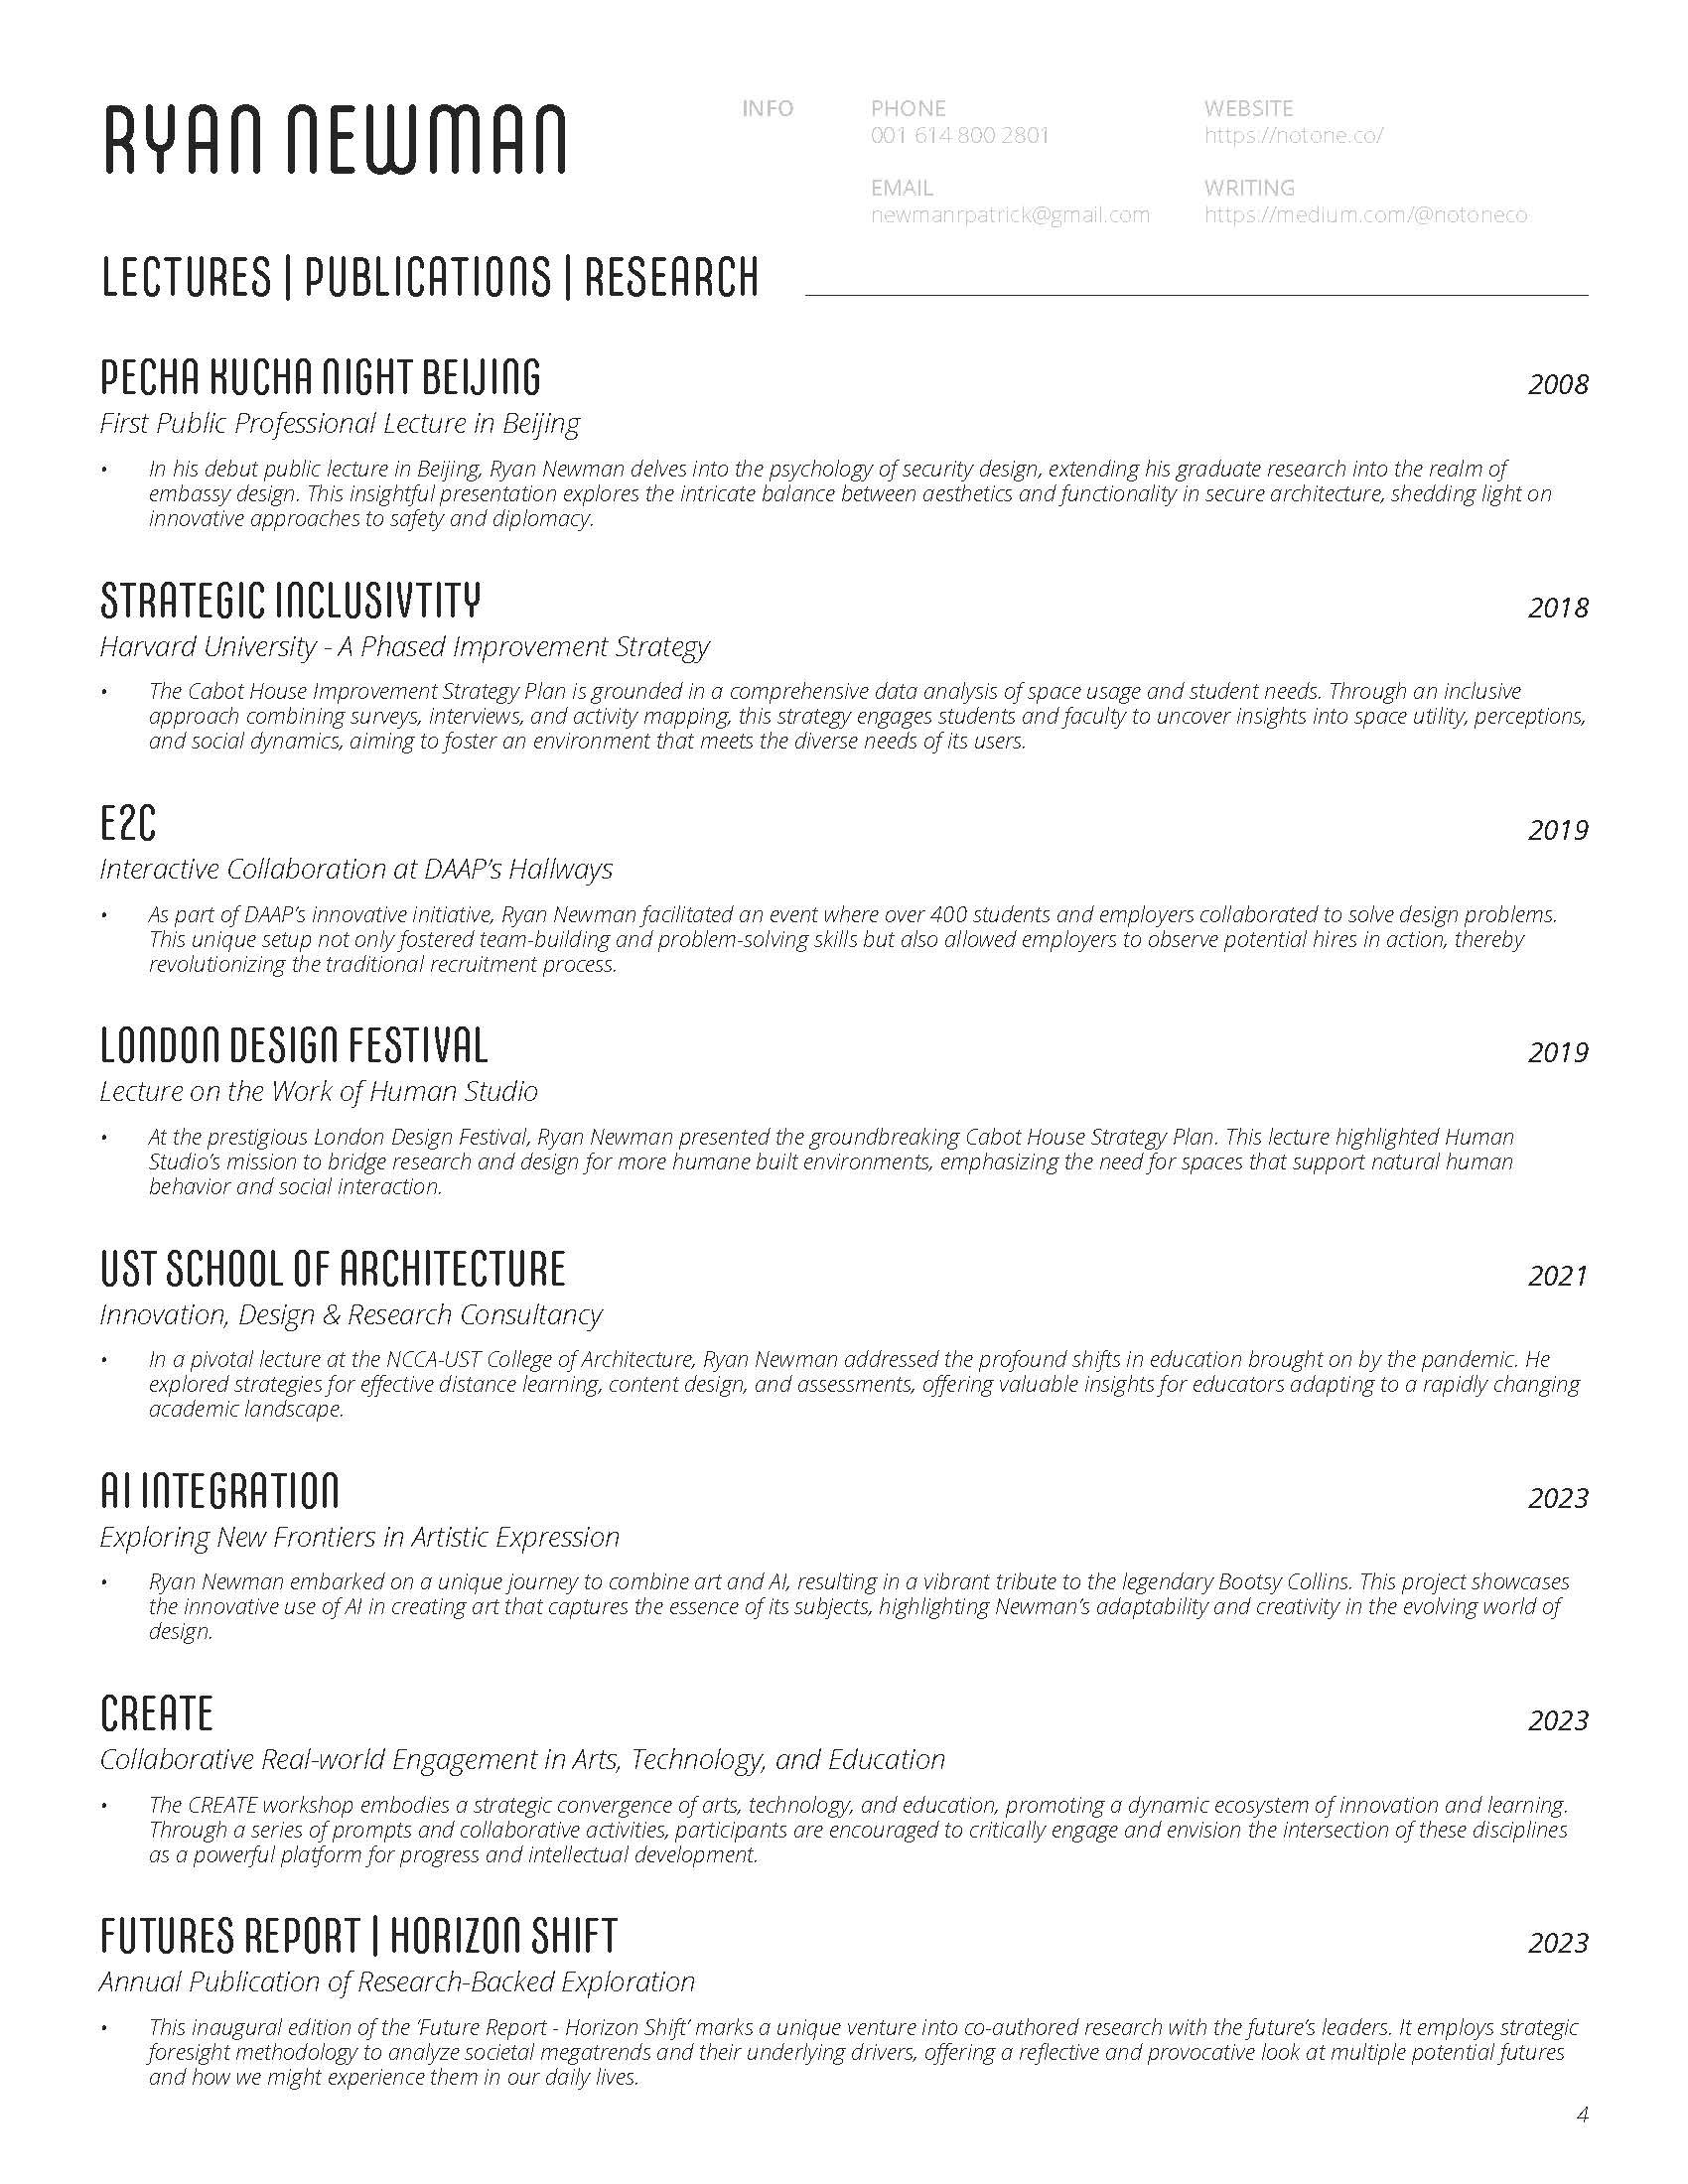 2023_RESUME_long form_Page_4.jpg